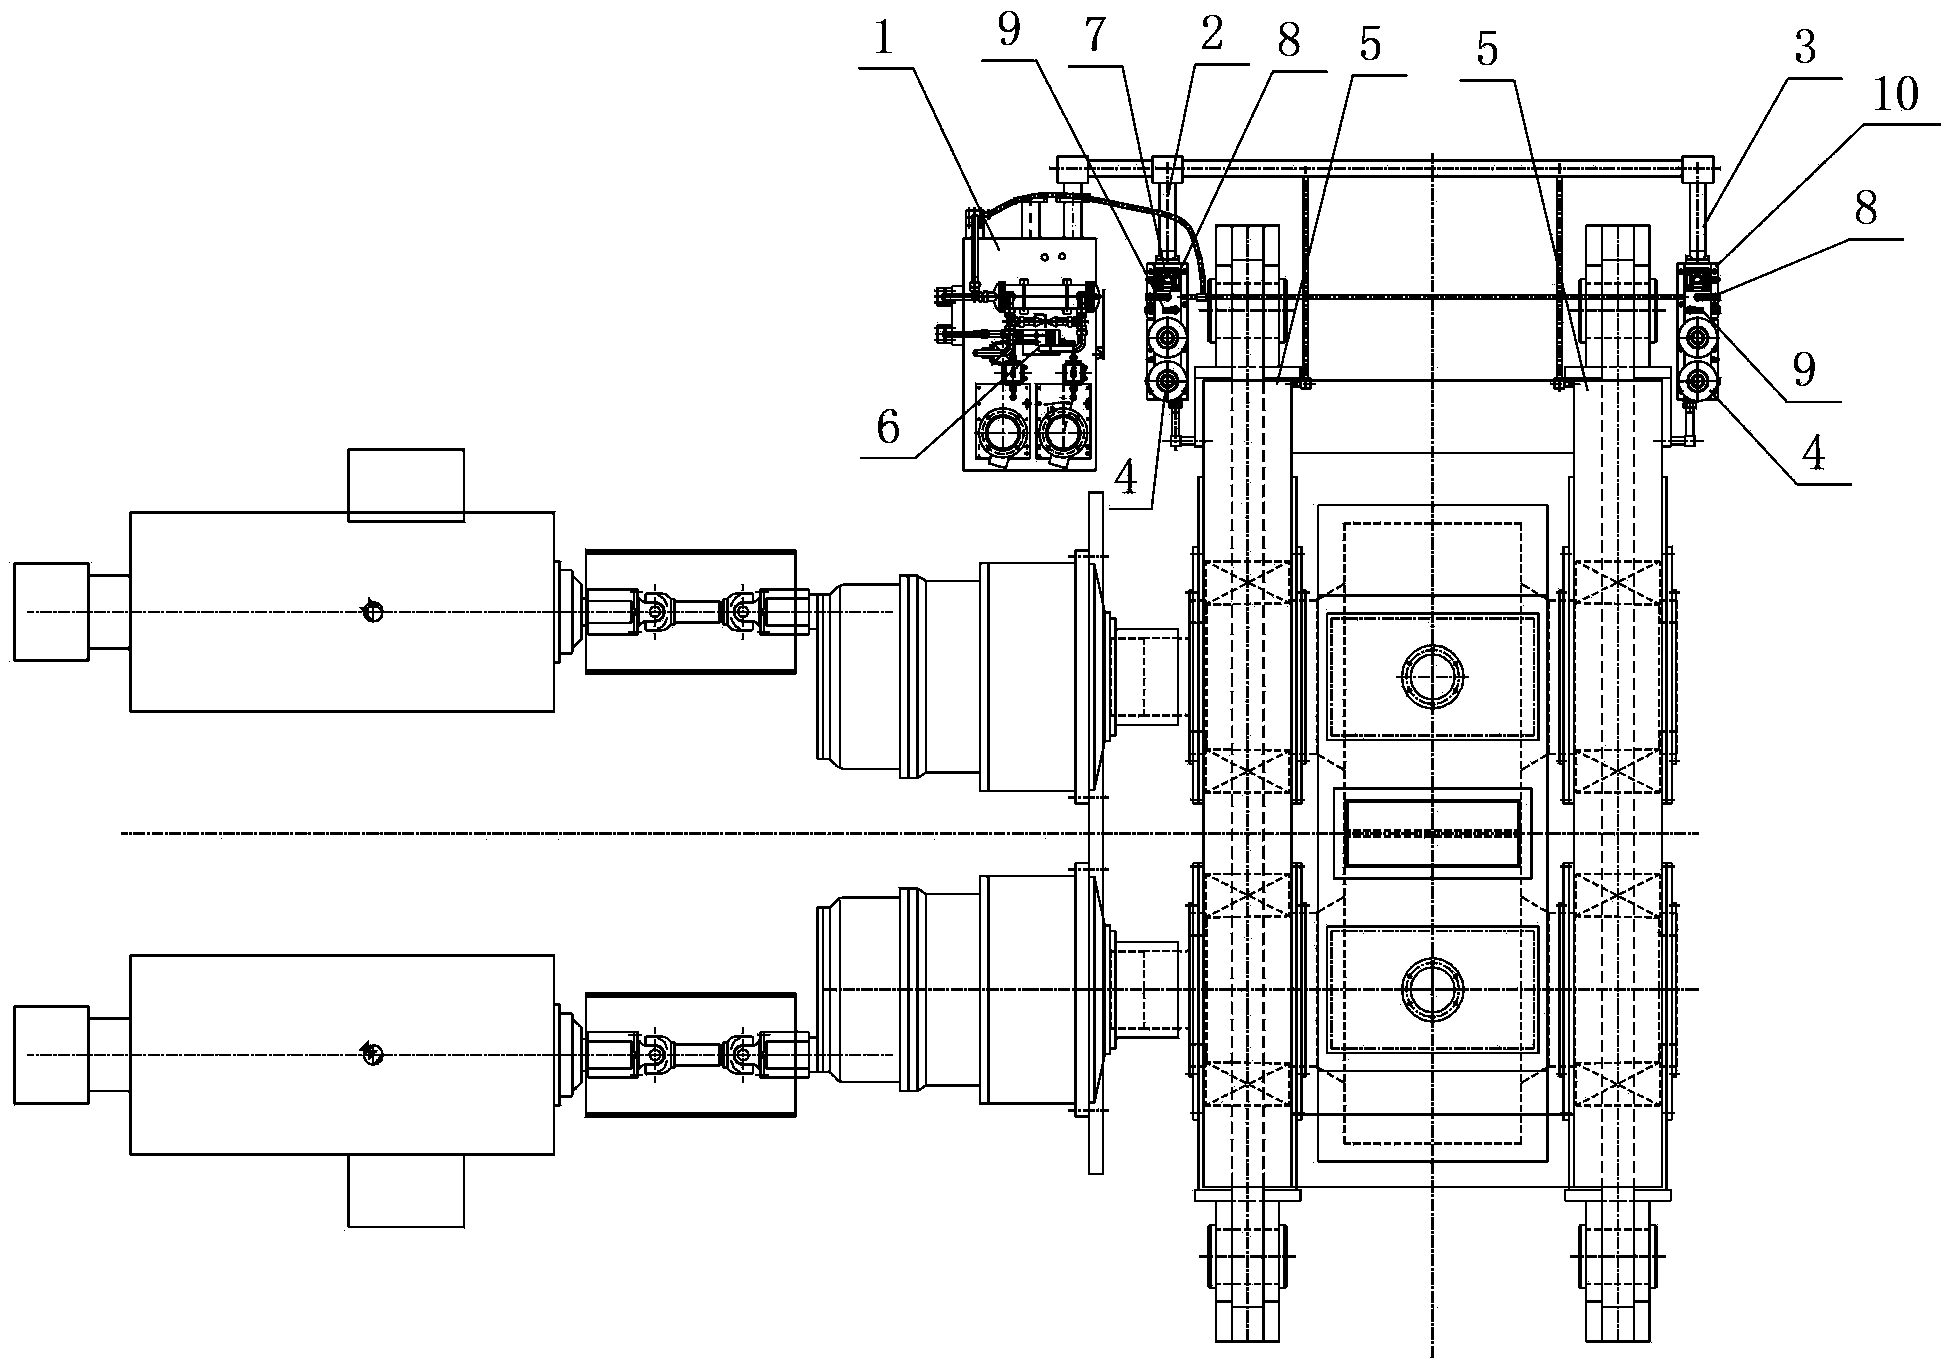 Roller press hydraulic system and automatic pressure stabilizing device thereof